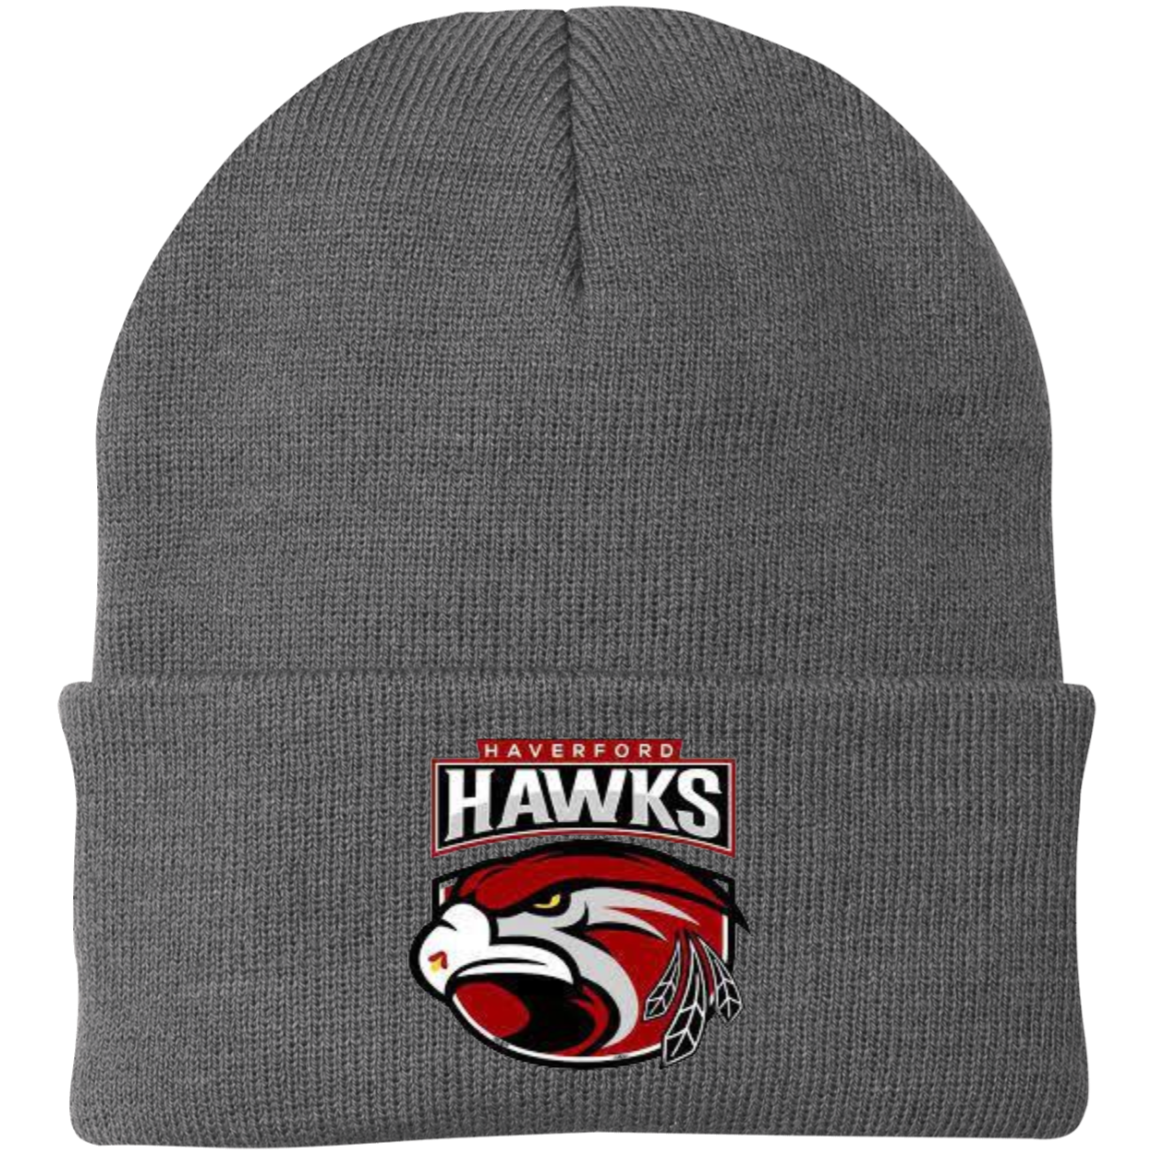 Hawks Embroidered Knit Cap